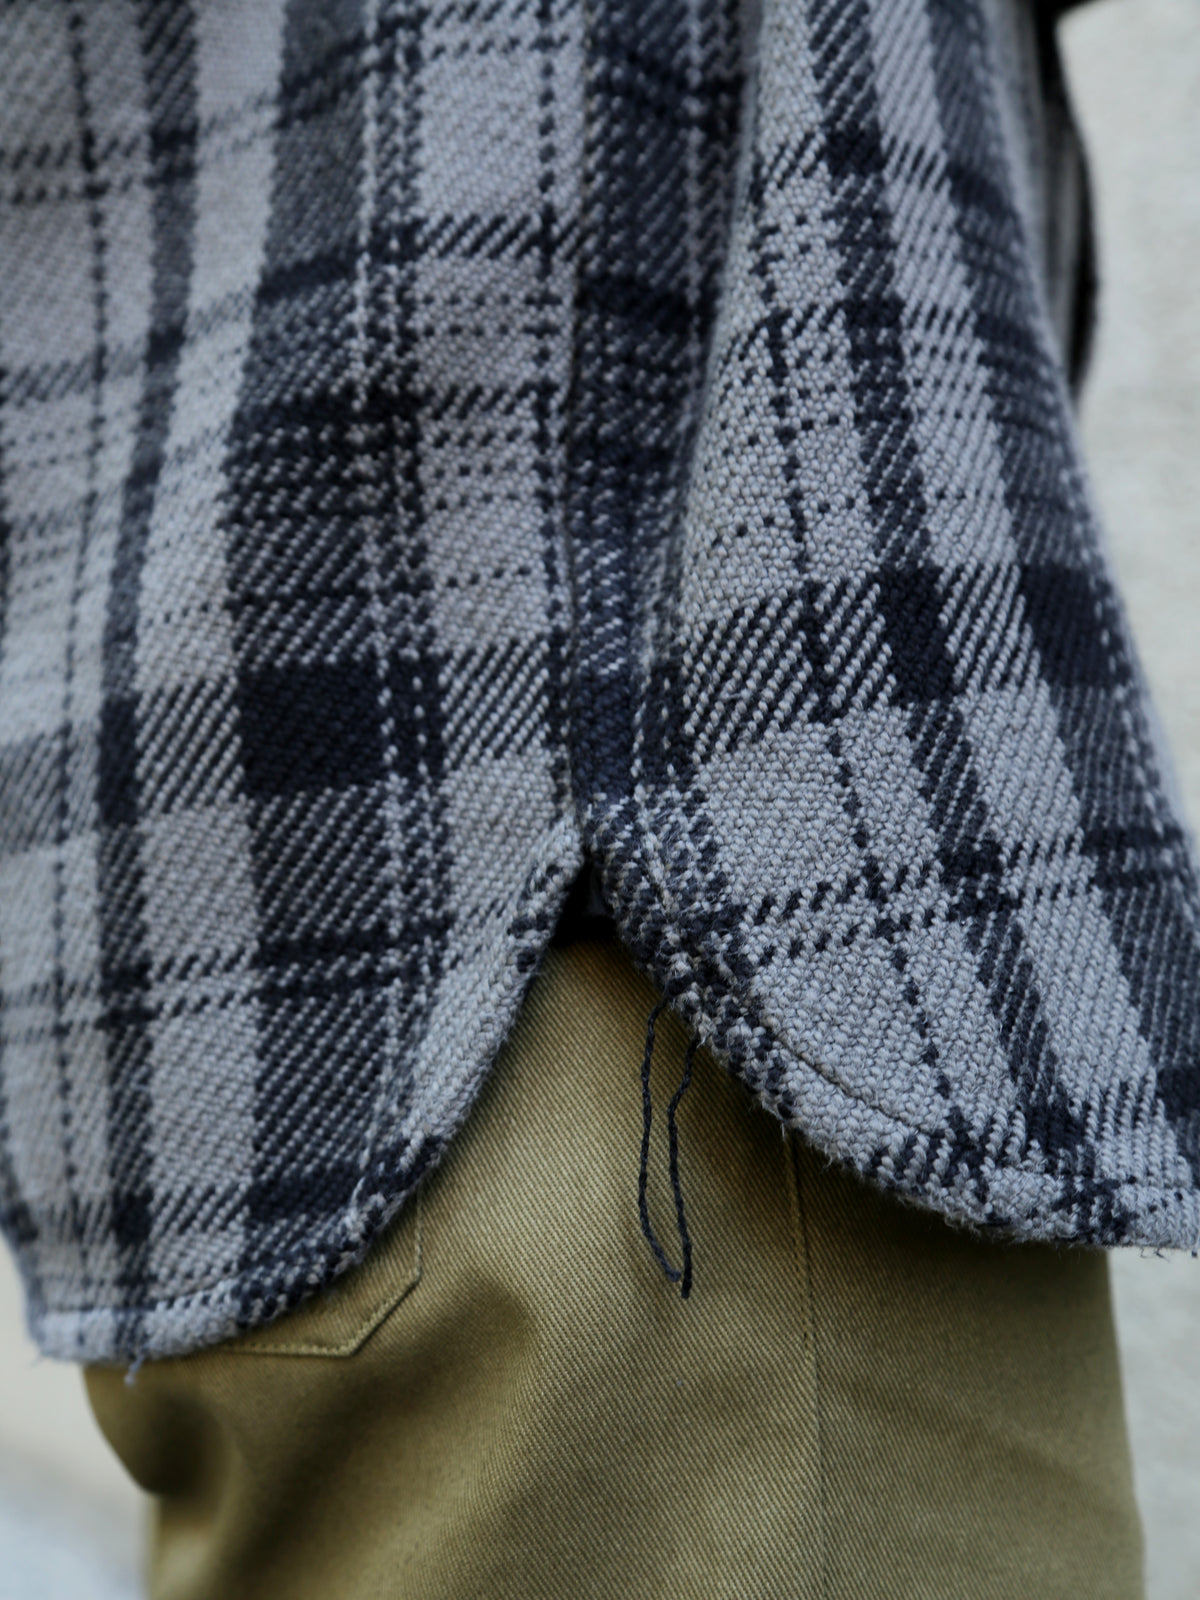 The Real McCoy's 8Hu Heavy Weight Flannel Shirt MS22101